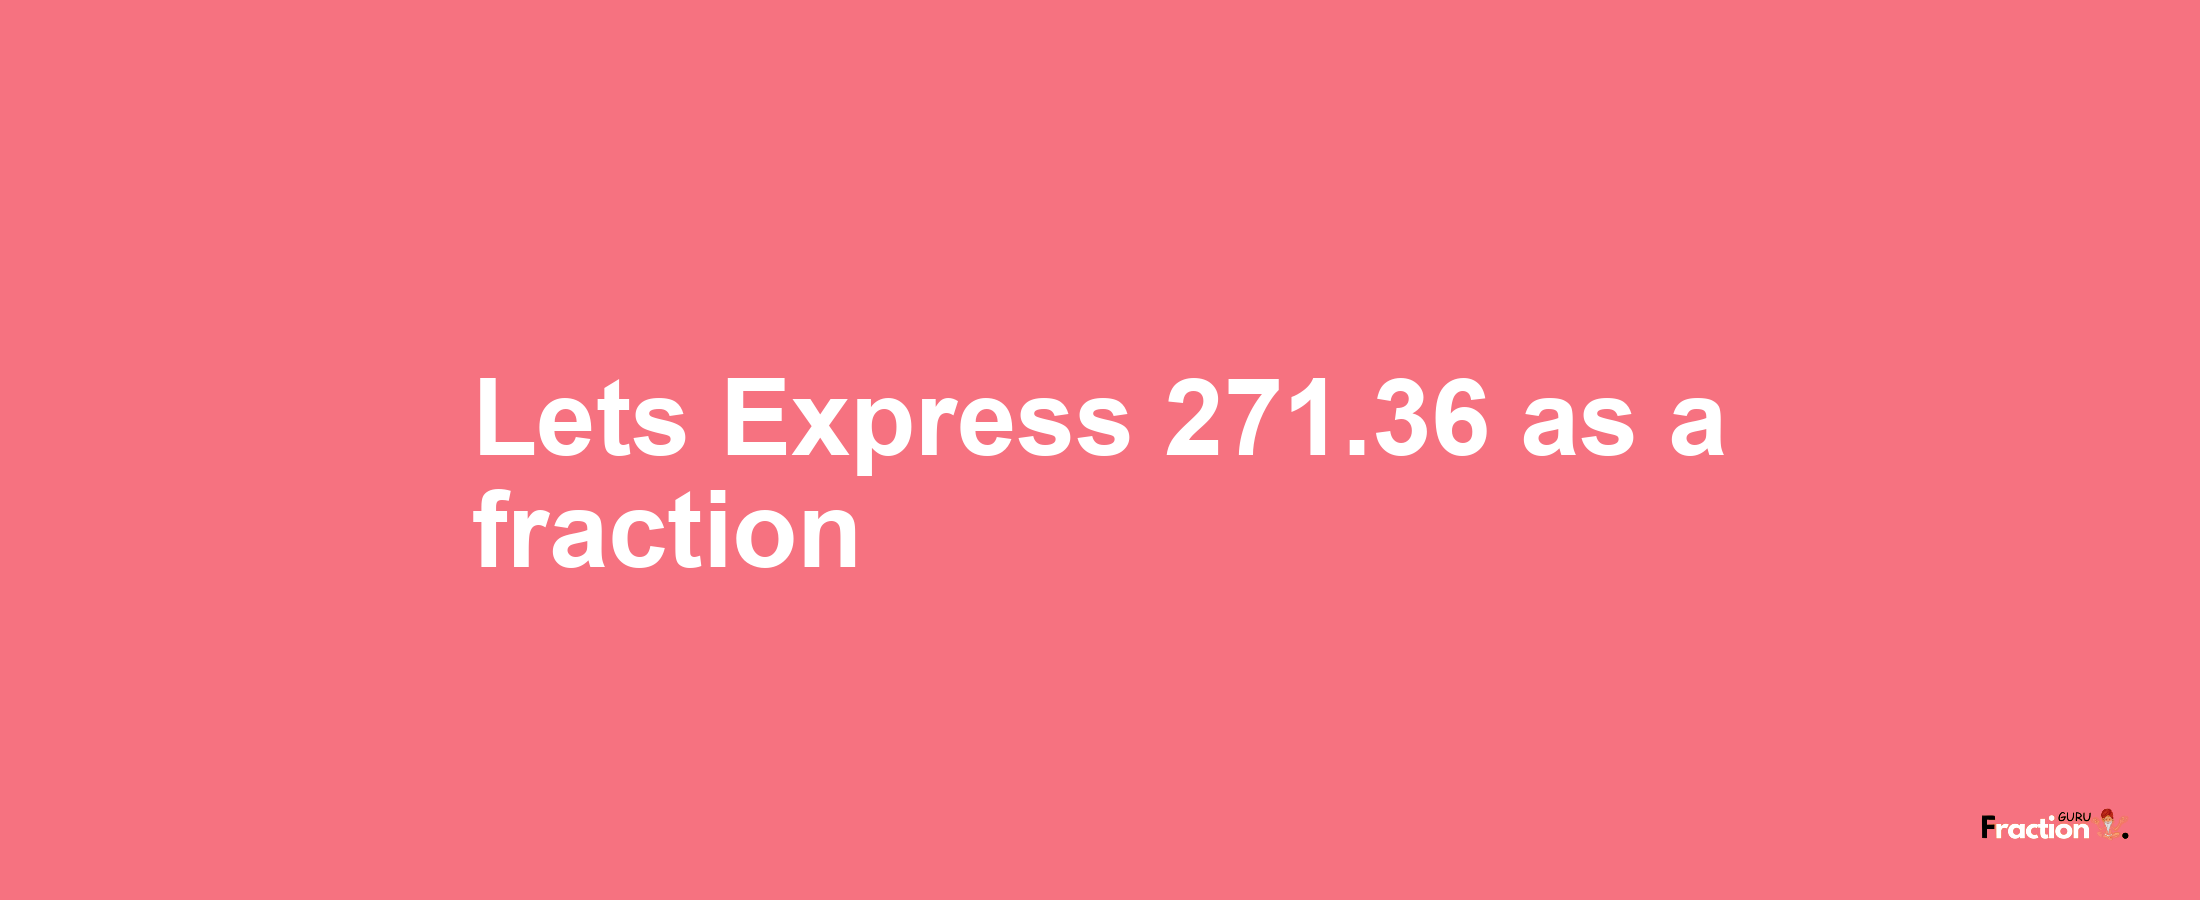 Lets Express 271.36 as afraction